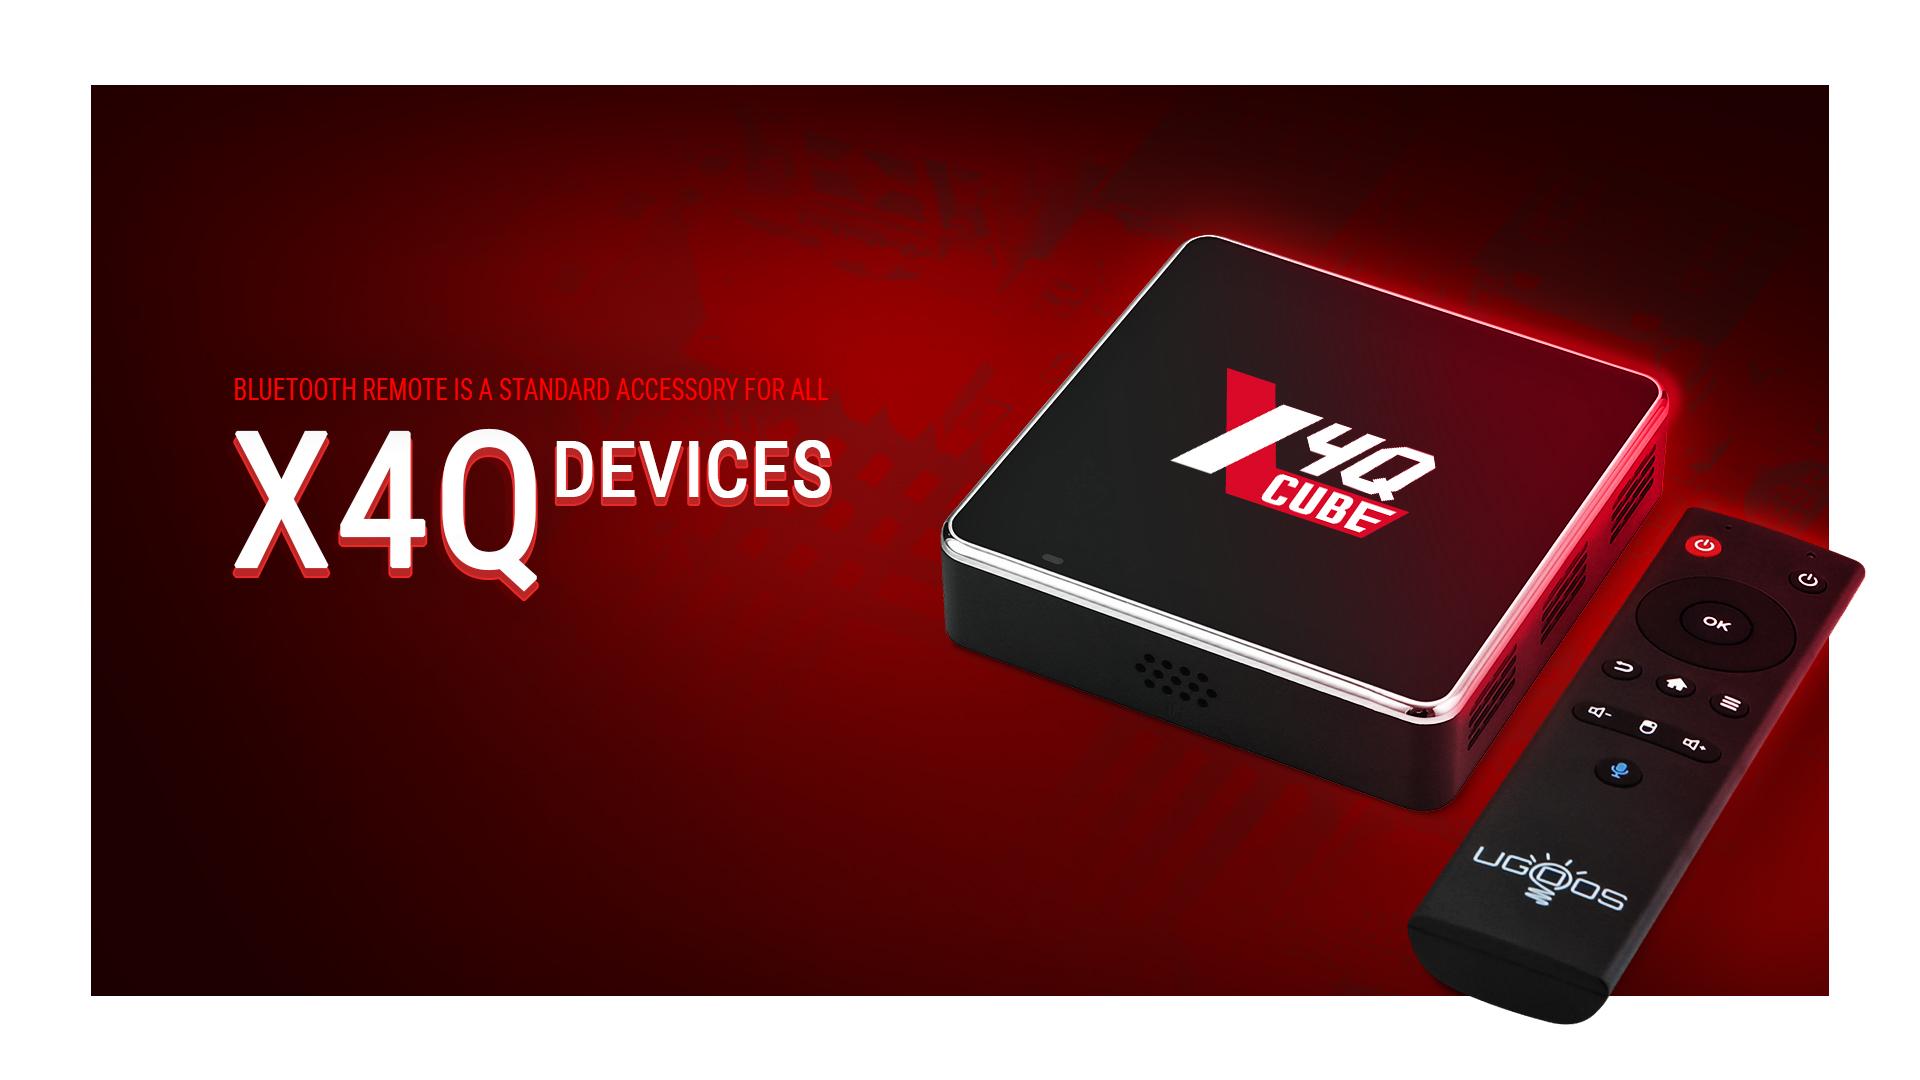 TV Box Family Series Devices based on Android 11